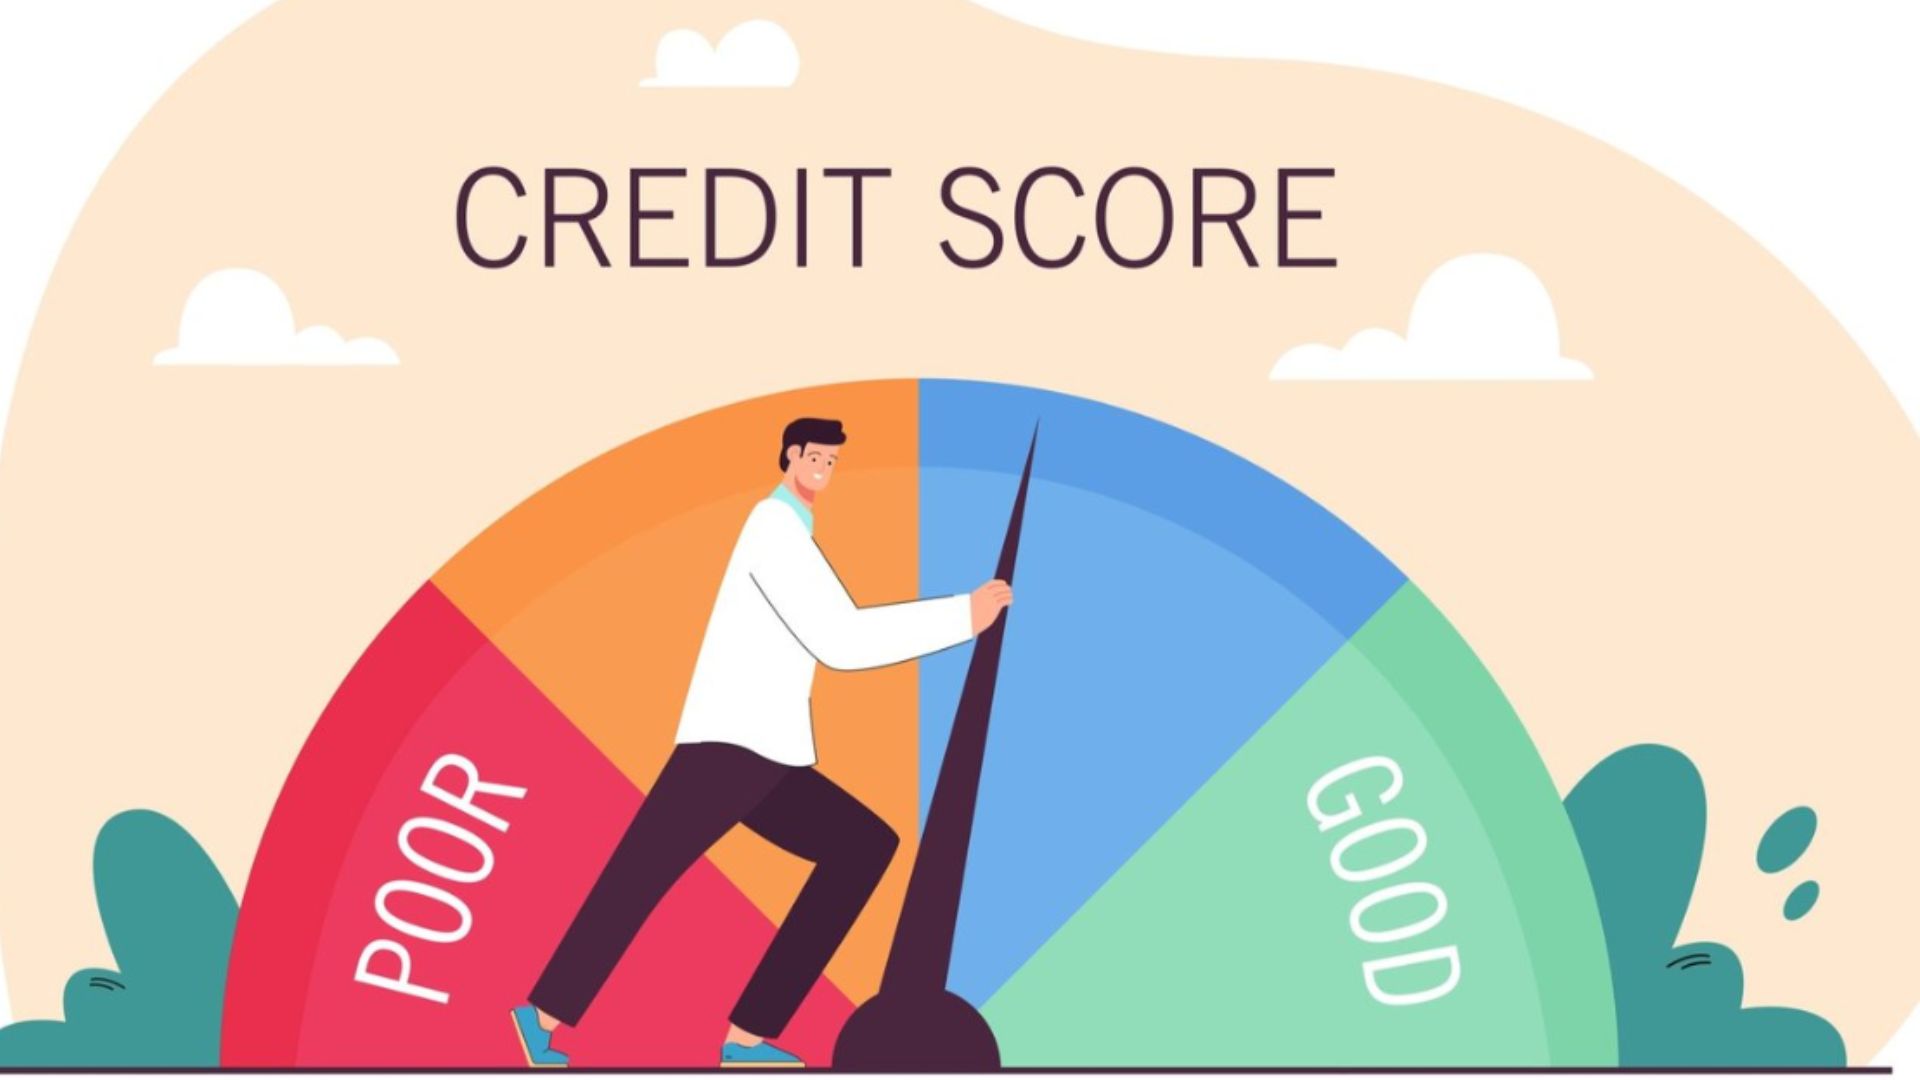 How to build credit and achieve a good credit score